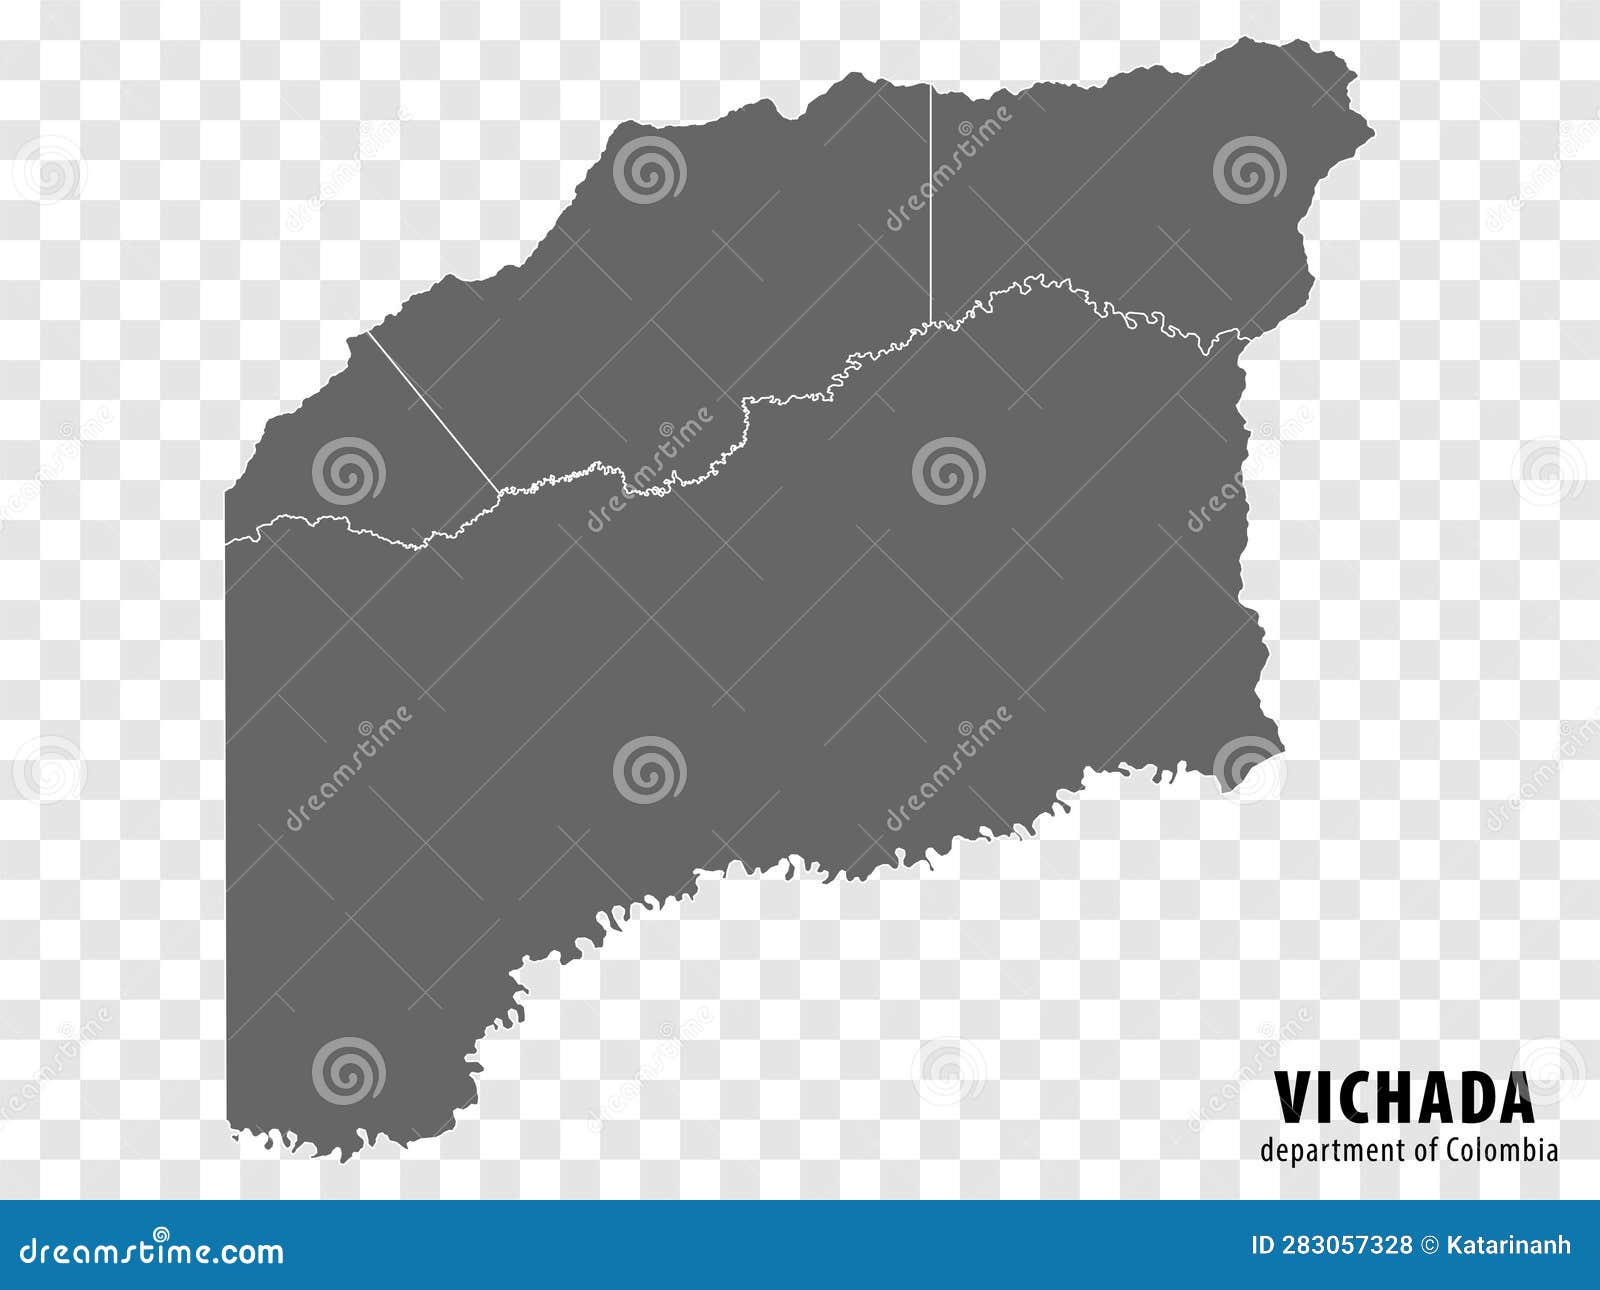 blank map vichada department of colombia. high quality map vichada with municipalities on transparent background